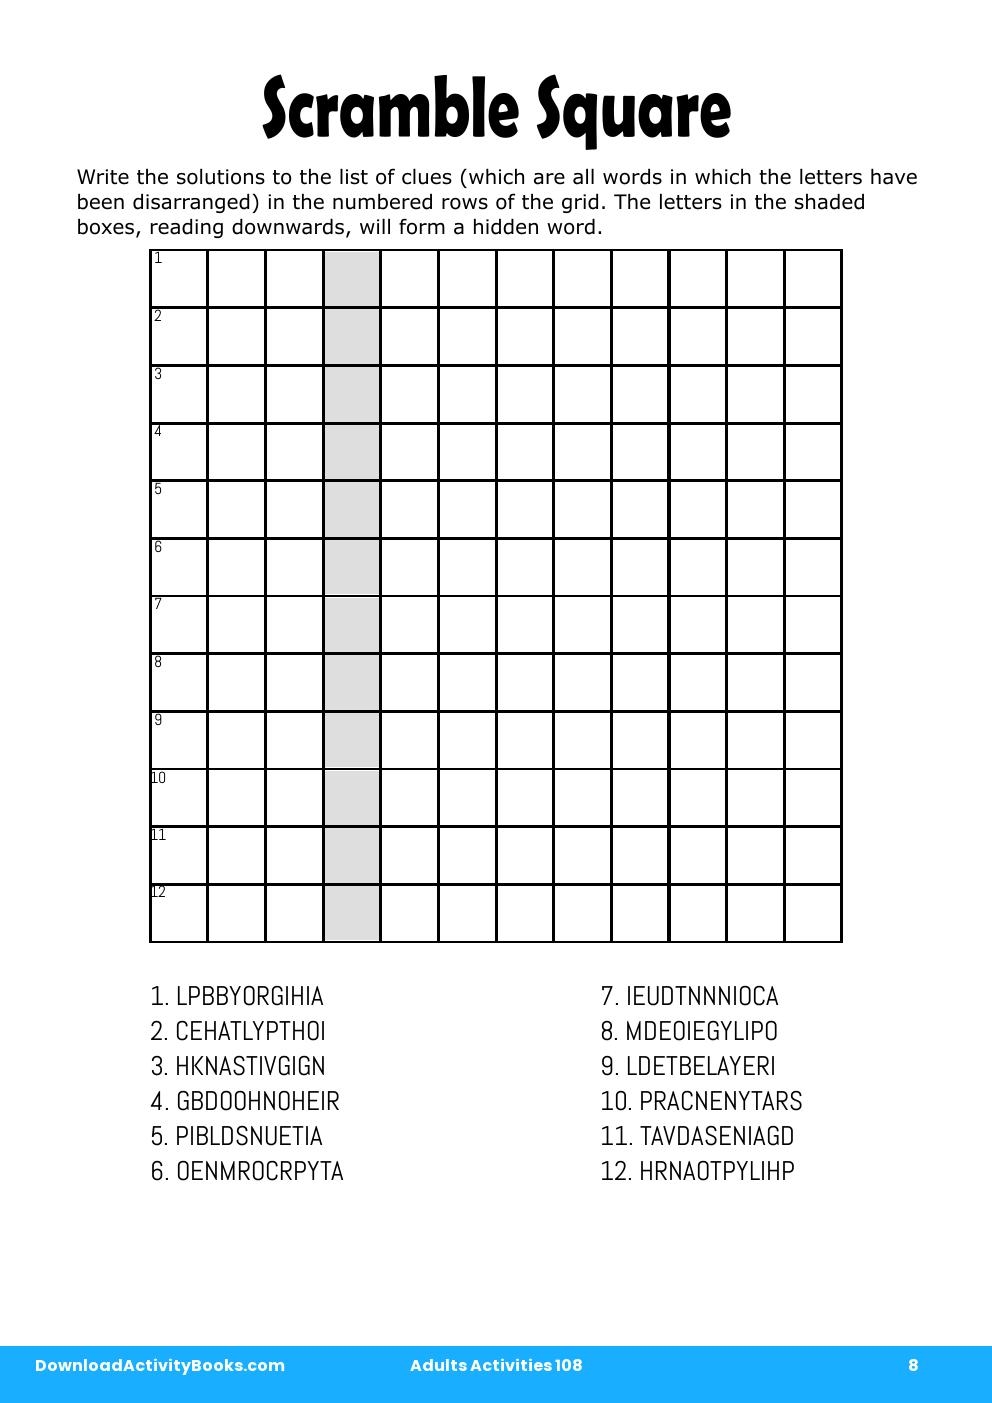 Scramble Square in Adults Activities 108